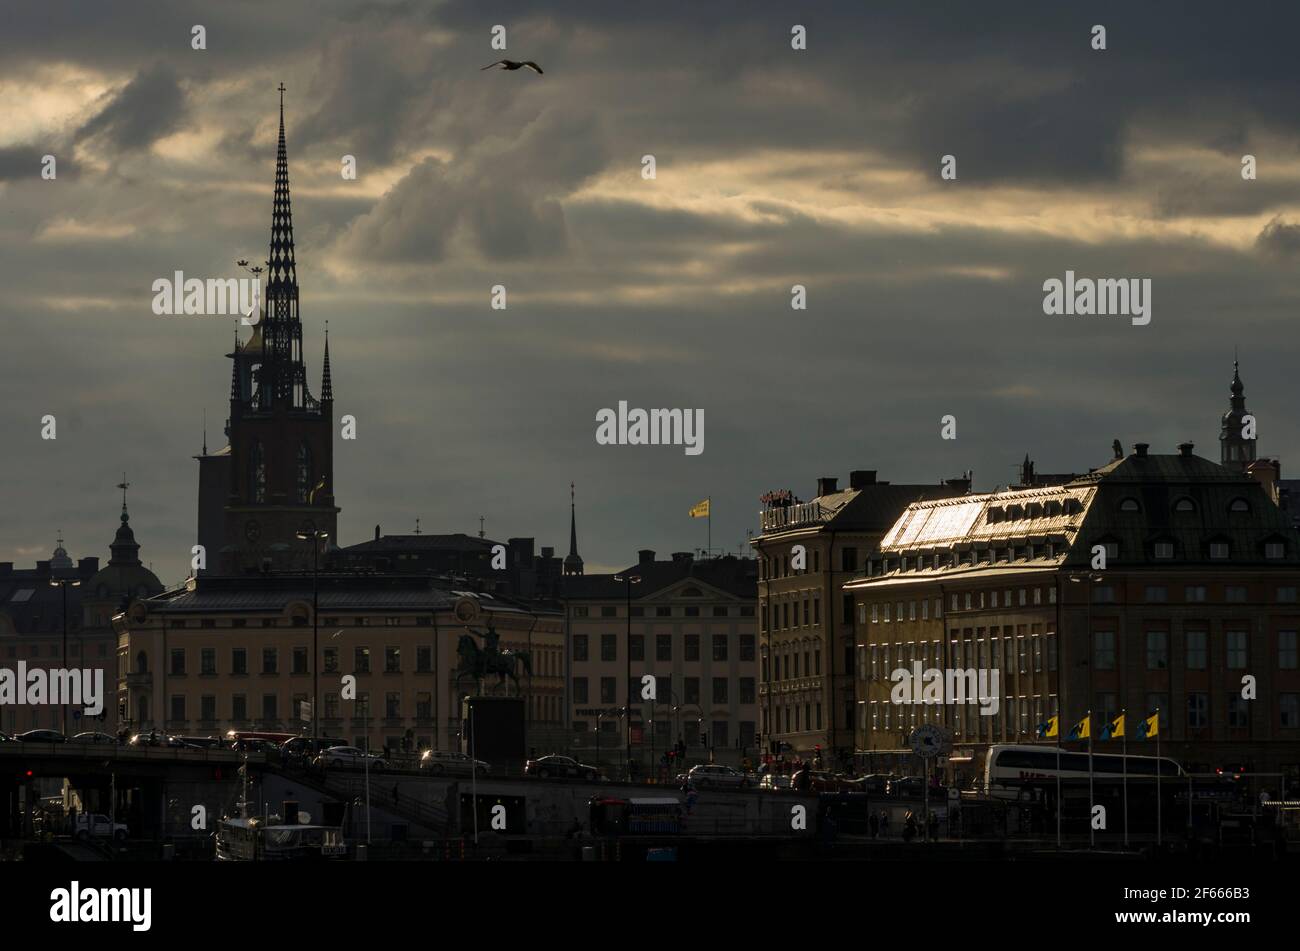 The skyline of Gamla Stan /Old Town including the spire of Riddarholmskyrkan, as seen from from Katarina Sofia Stock Photo